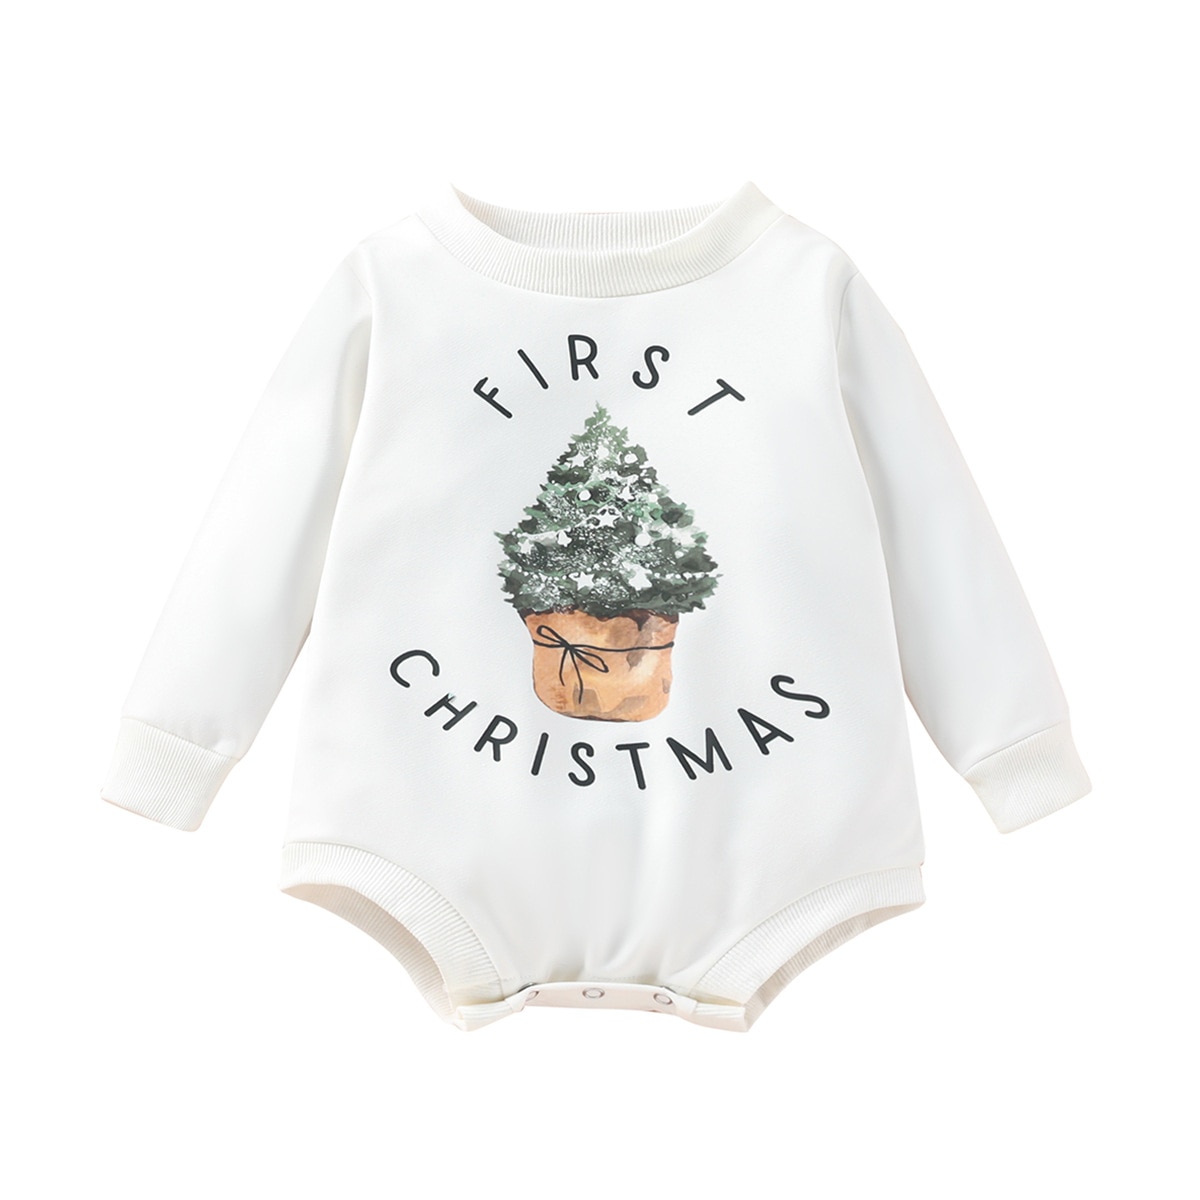 Baby Boy Girls Christmas Outfit Romper Jumpsuit Sw...